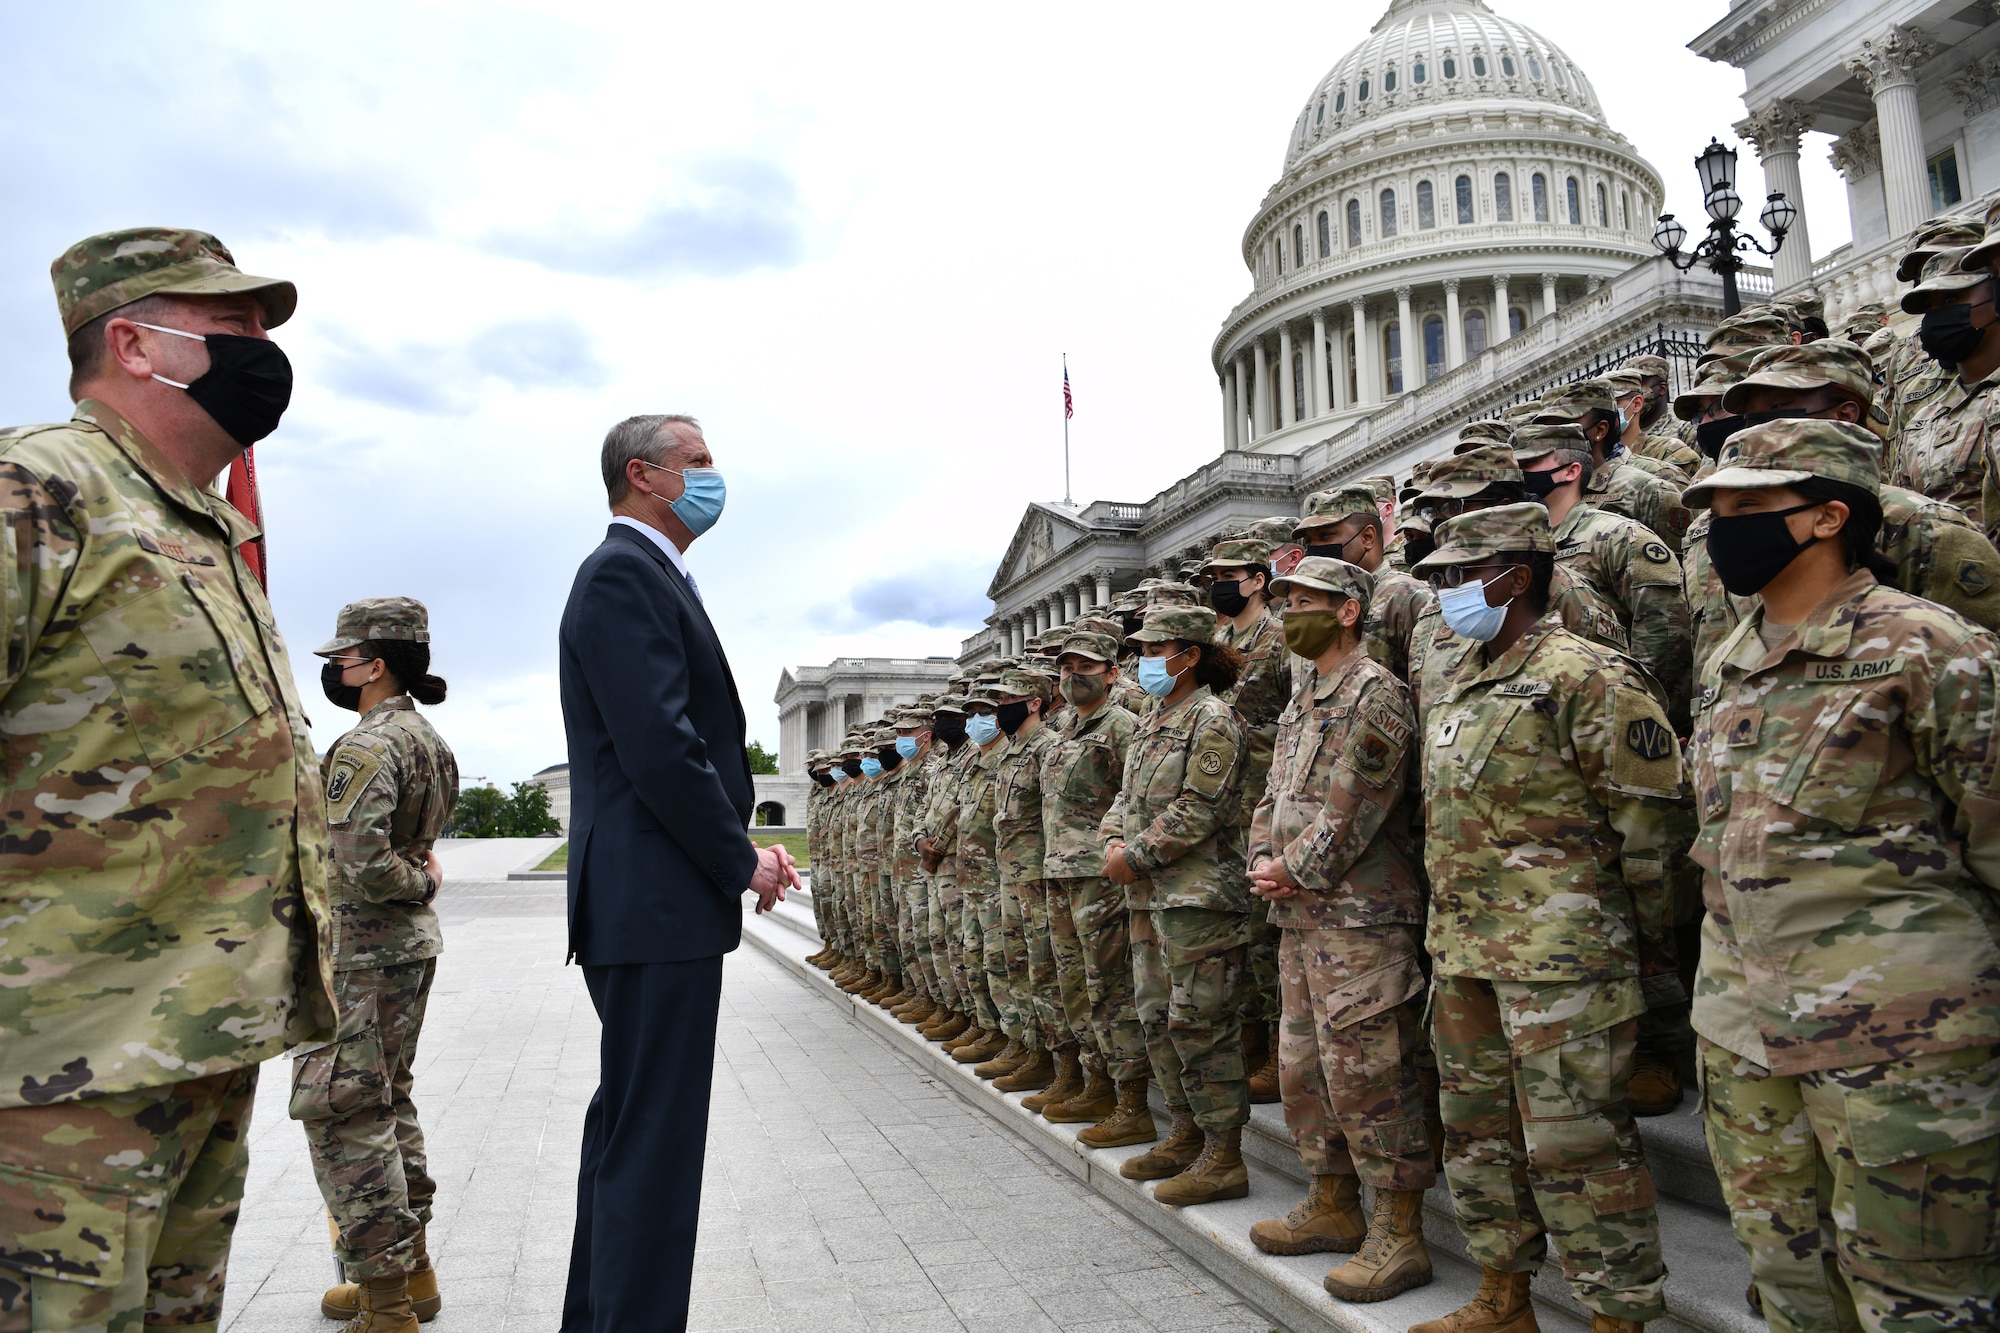 Massachusetts Governor Charlie Baker and Adjutant General of the Massachusetts National Guard Maj. Gen. Gary Keefe thank Soldiers and Airmen of the MA NG for their service in front of the United States Capitol Building in Washington, D.C., May 14, 2021. Since January, Army and Air National Guard units from around the country have provided ongoing security, communication, medical, evacuation, logistical and safety support to capital civil authorities. (U.S. Air National Guard photo by Staff Sgt. Hanna Smith)